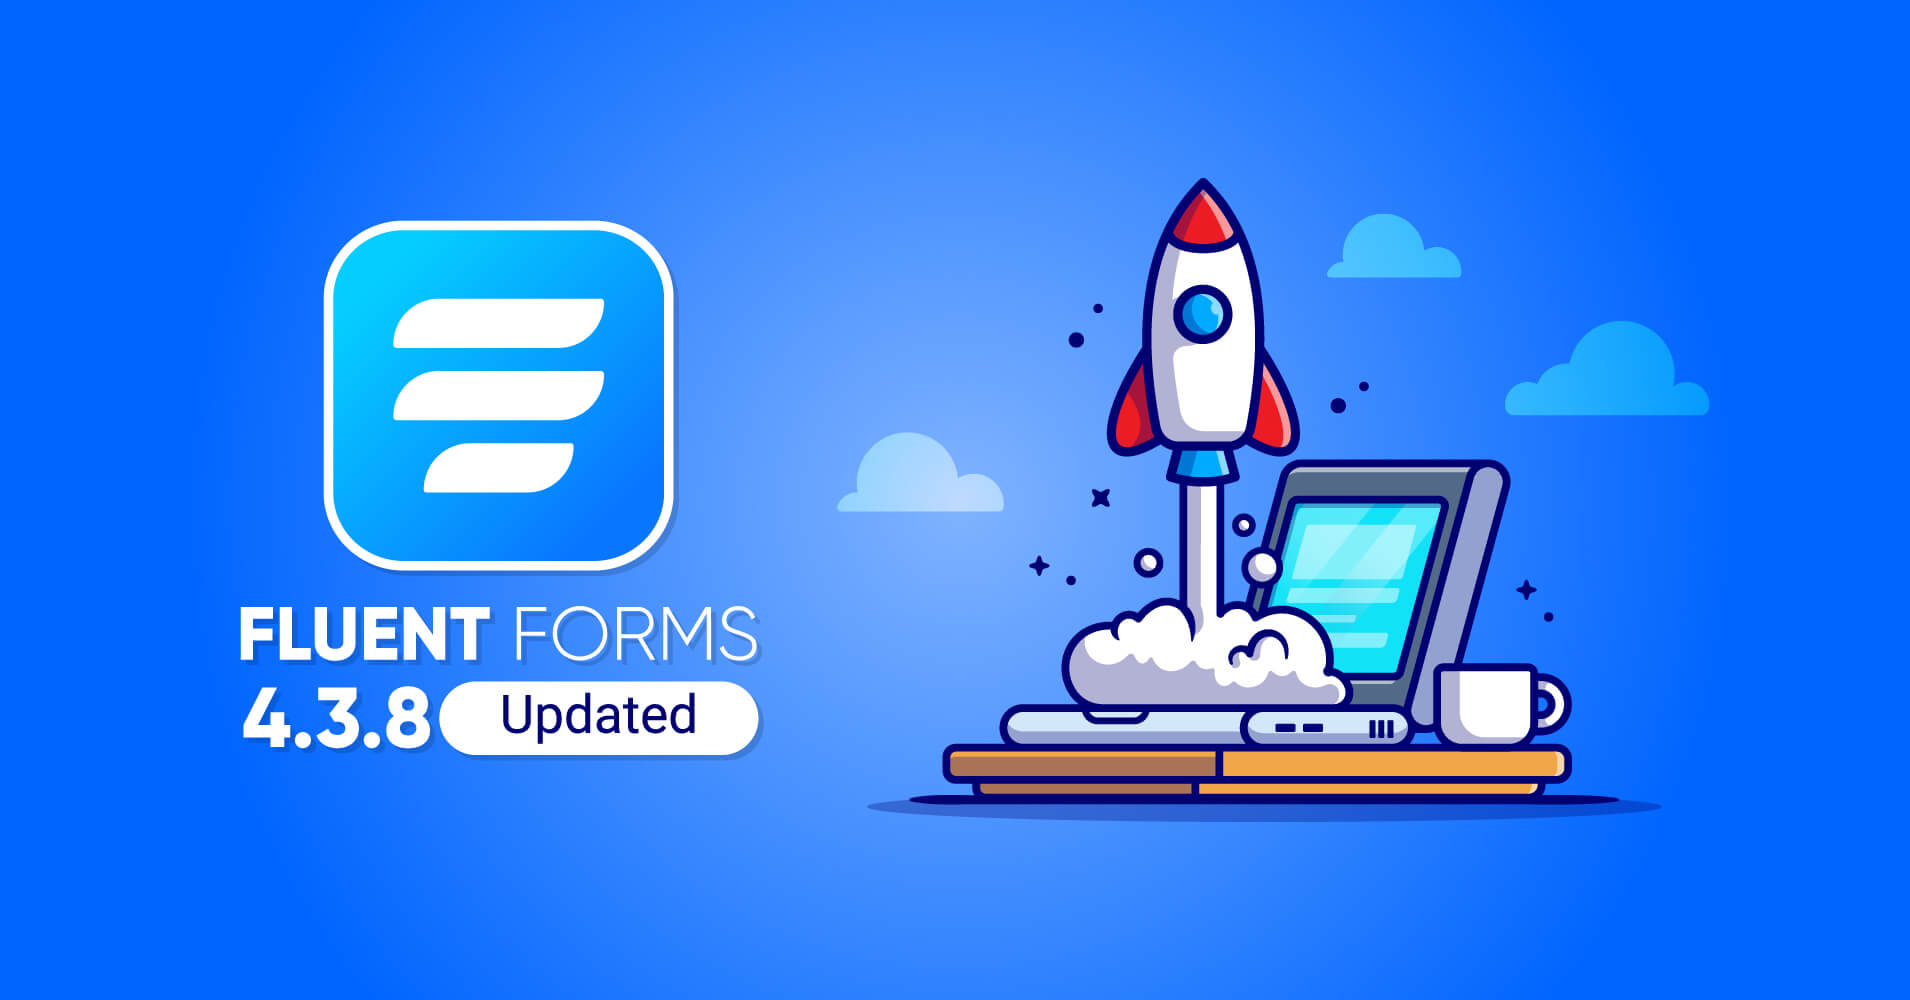 Fluent Forms Update 4.3.8 release note